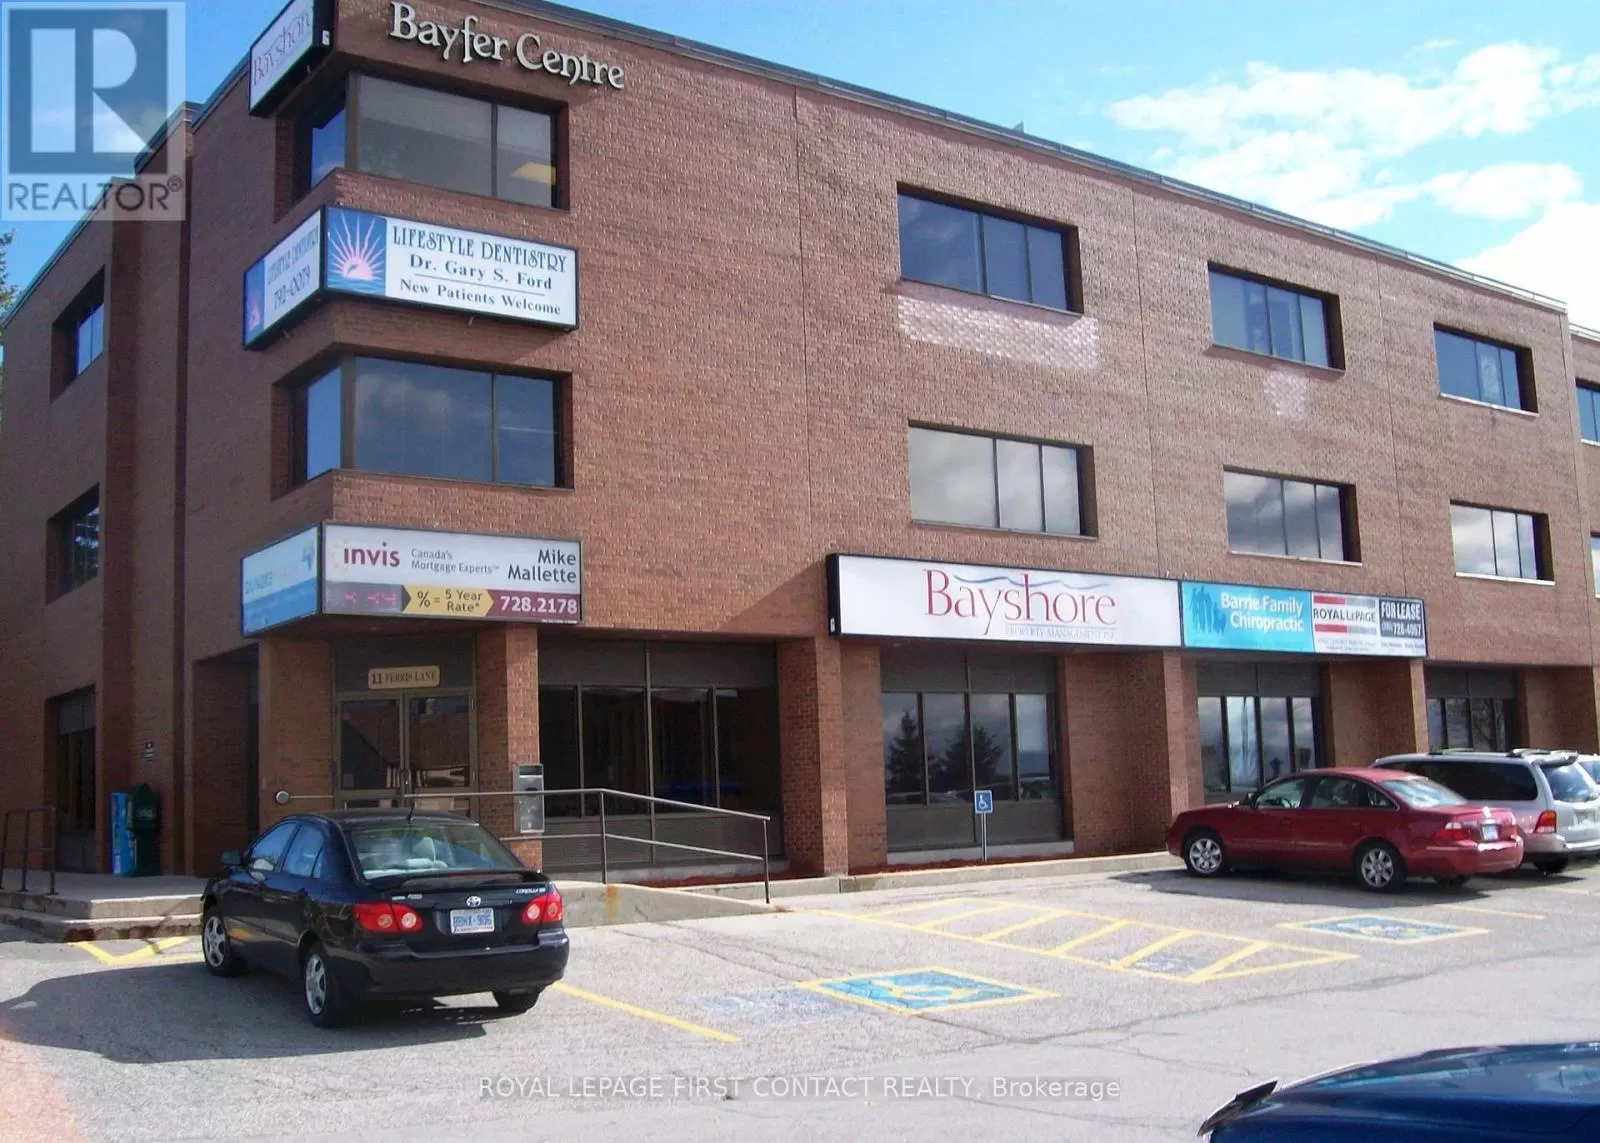 Offices for rent: #200 -11 Ferris Lane, Barrie, Ontario L4M 5N6